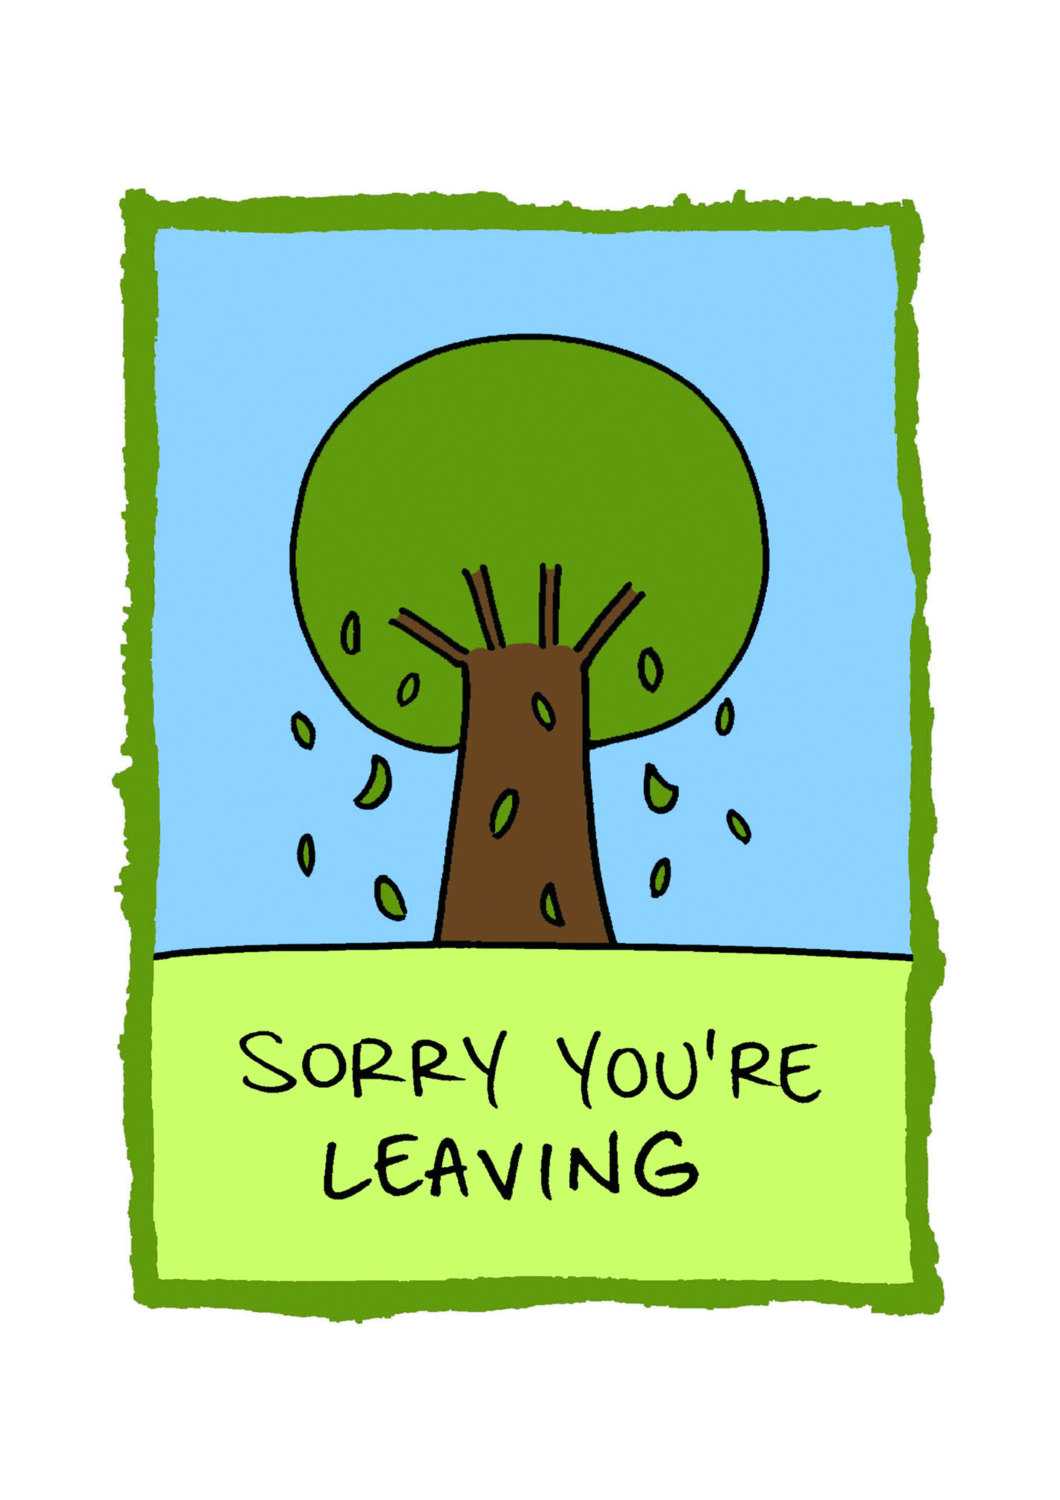 Sorry You Re Leaving Card Template ] – Sorry You Re Leaving Throughout Sorry You Re Leaving Card Template